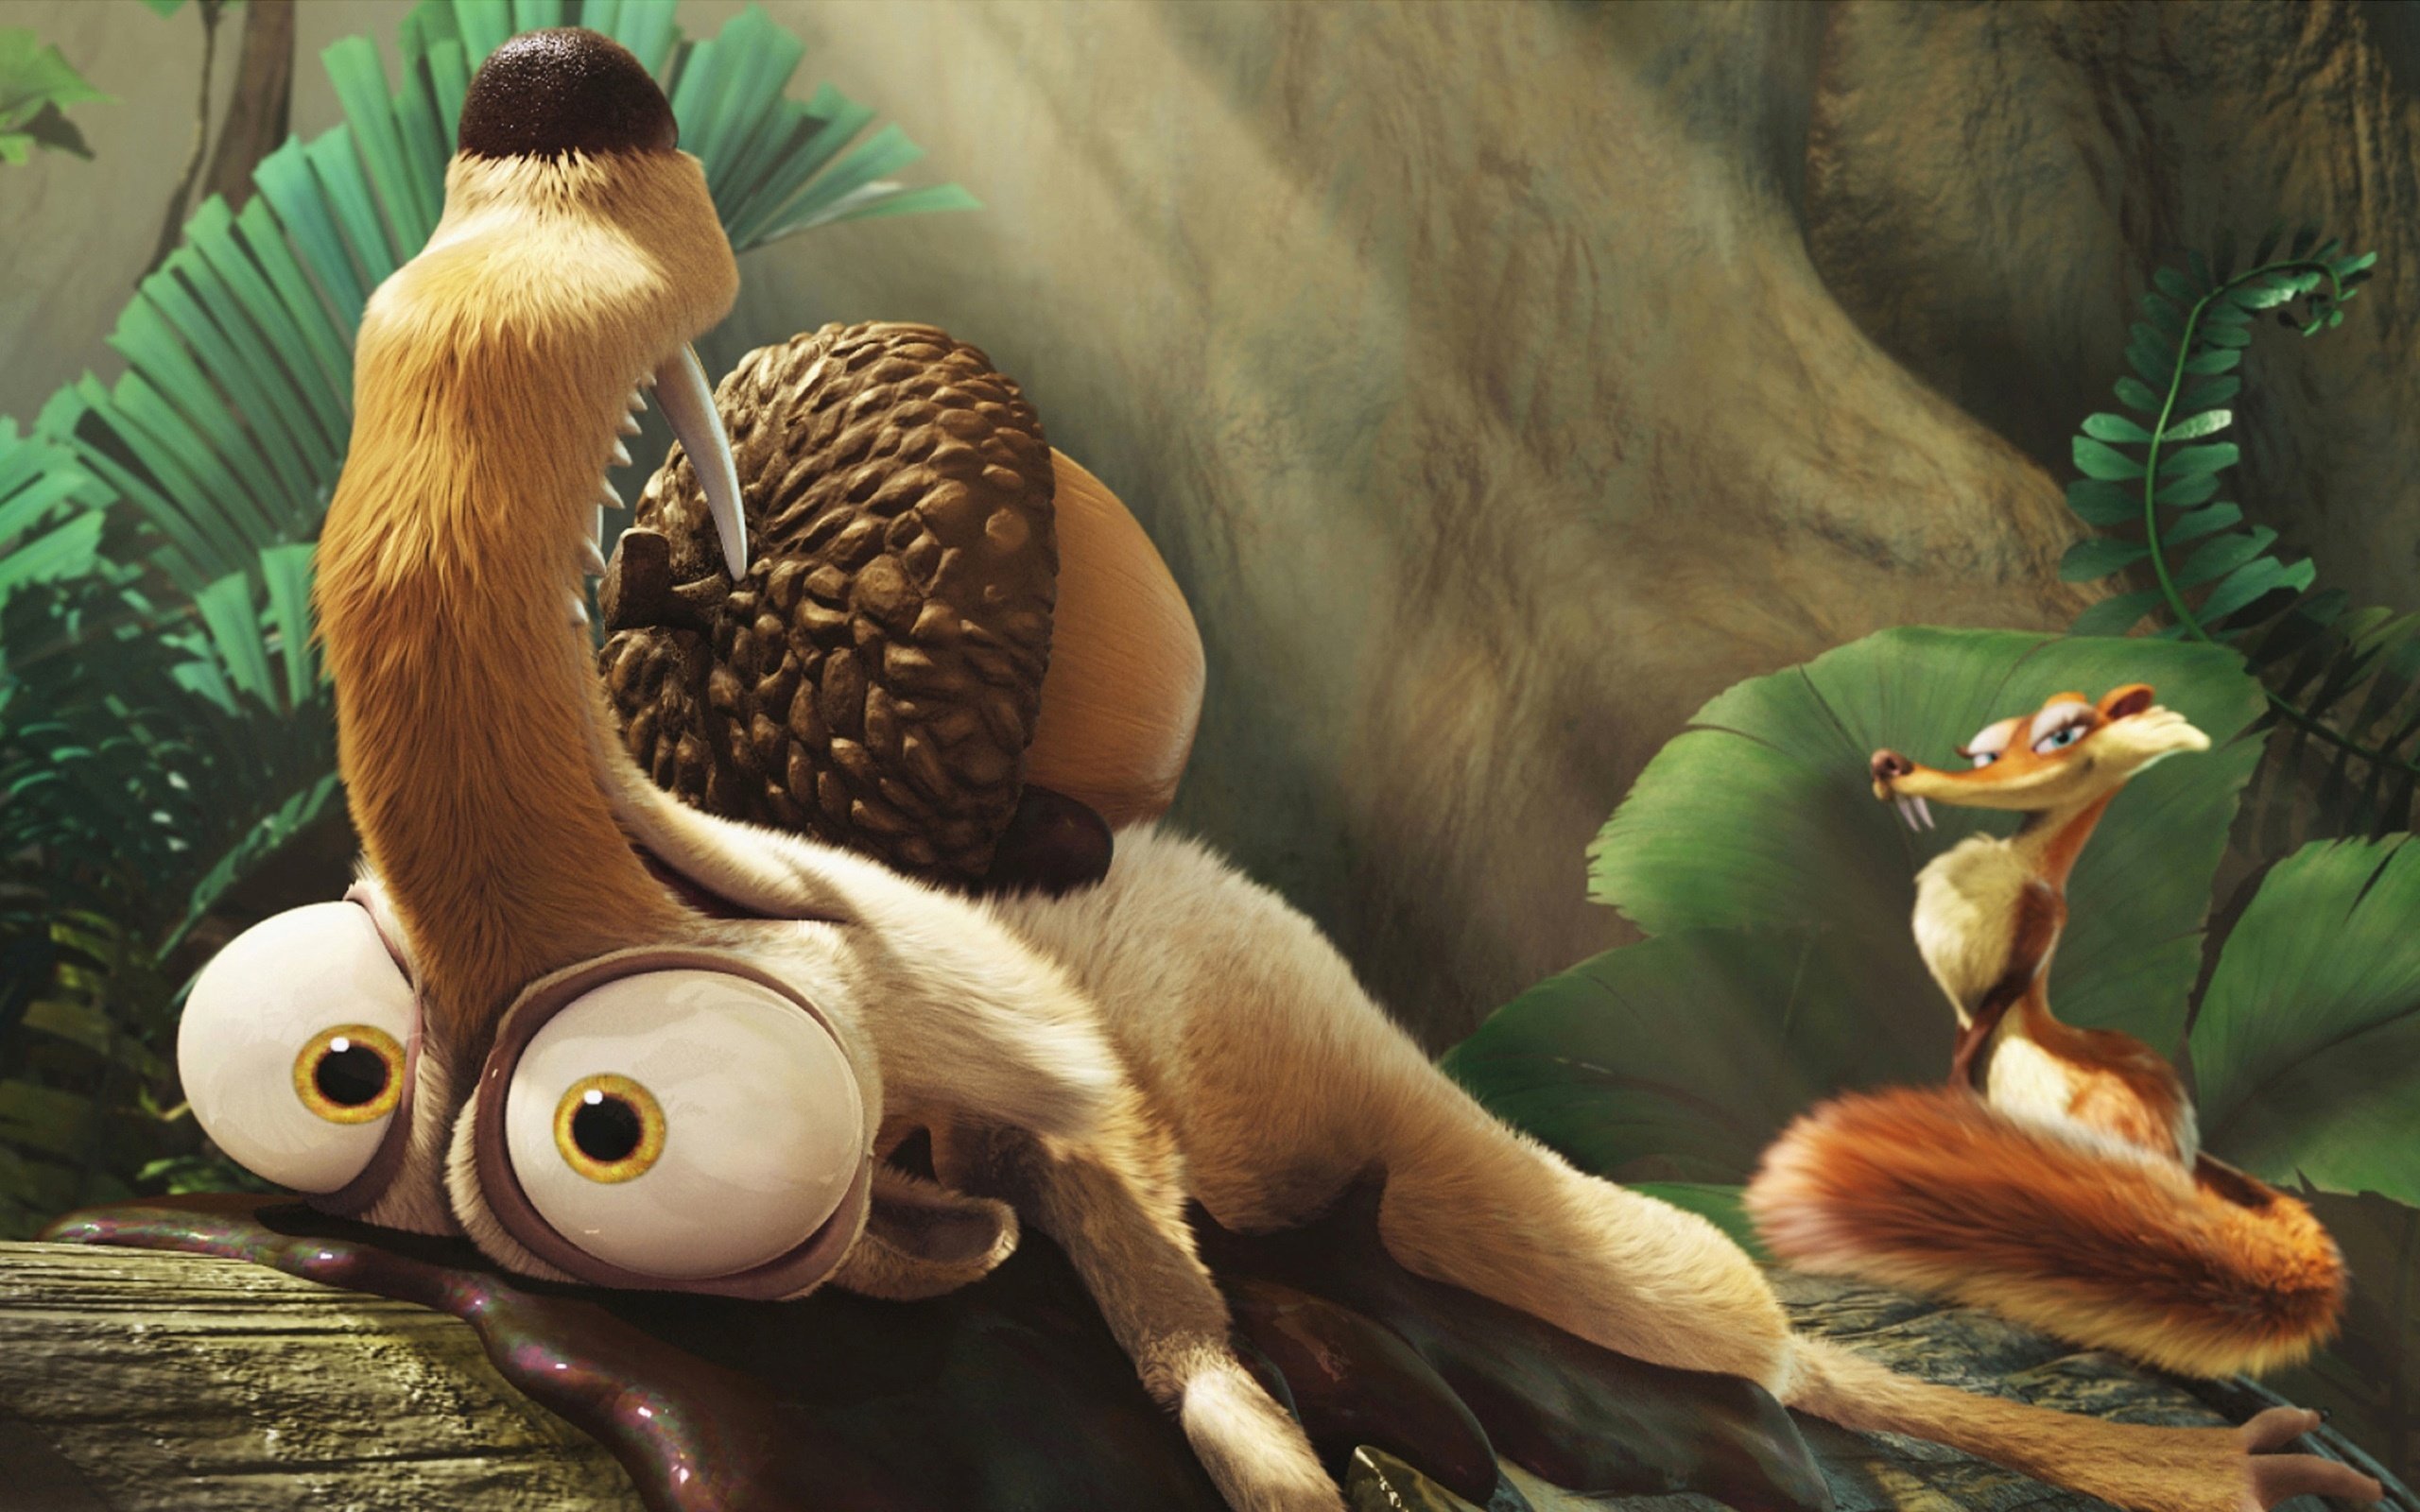 Ice Age: Dawn Of The Dinosaurs wallpaper HD for desktop background